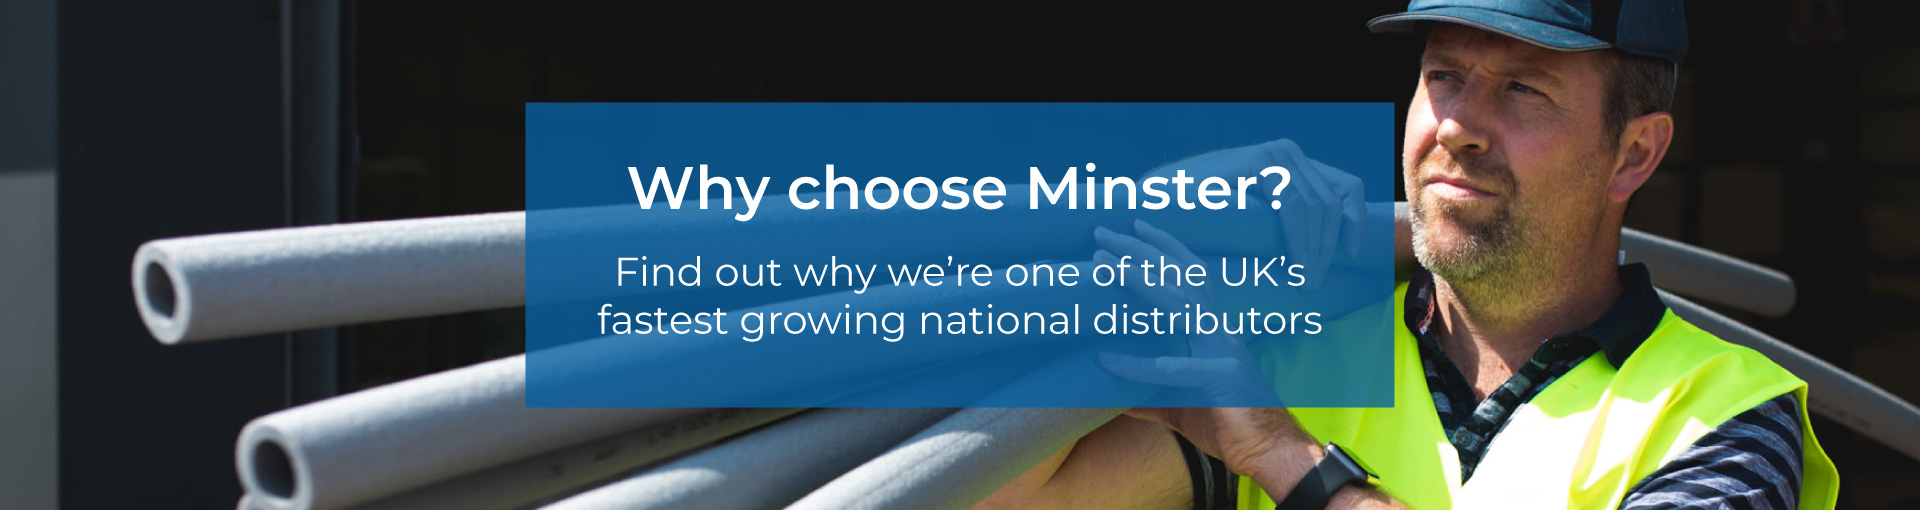 Why choose Minster?